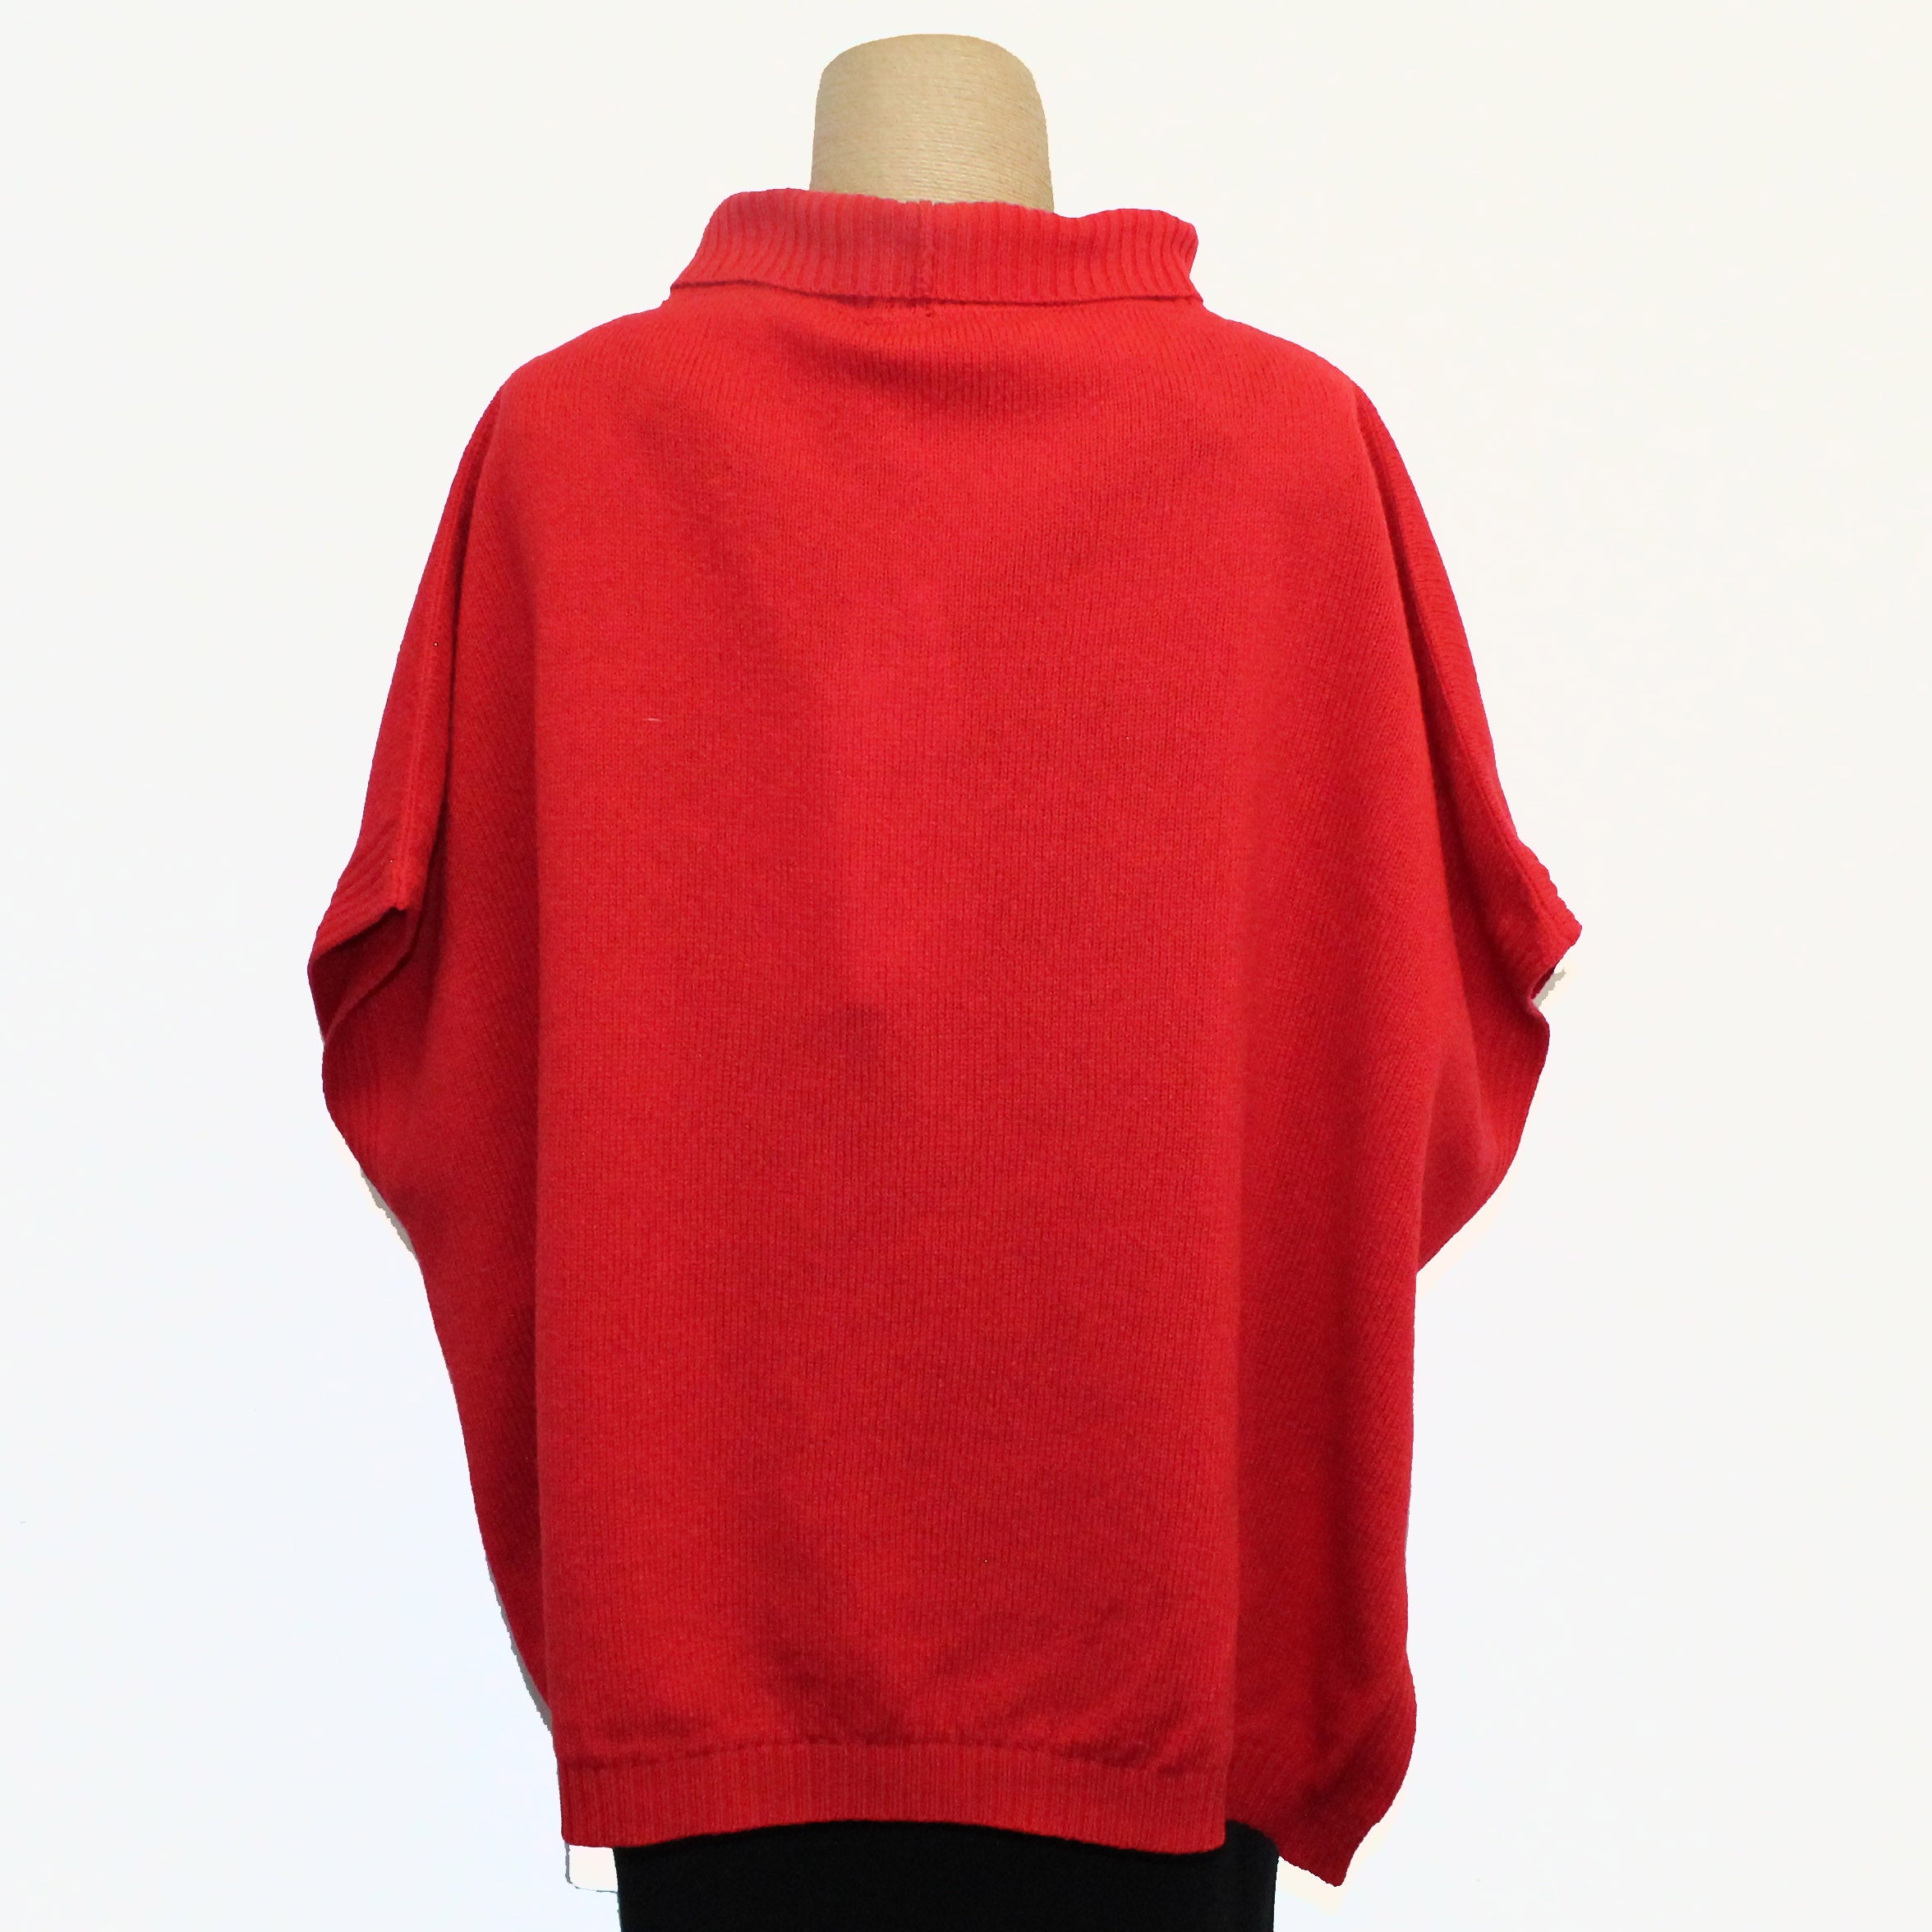 IVKO Pullover, Elbow Length, Intarsia, Red, OS